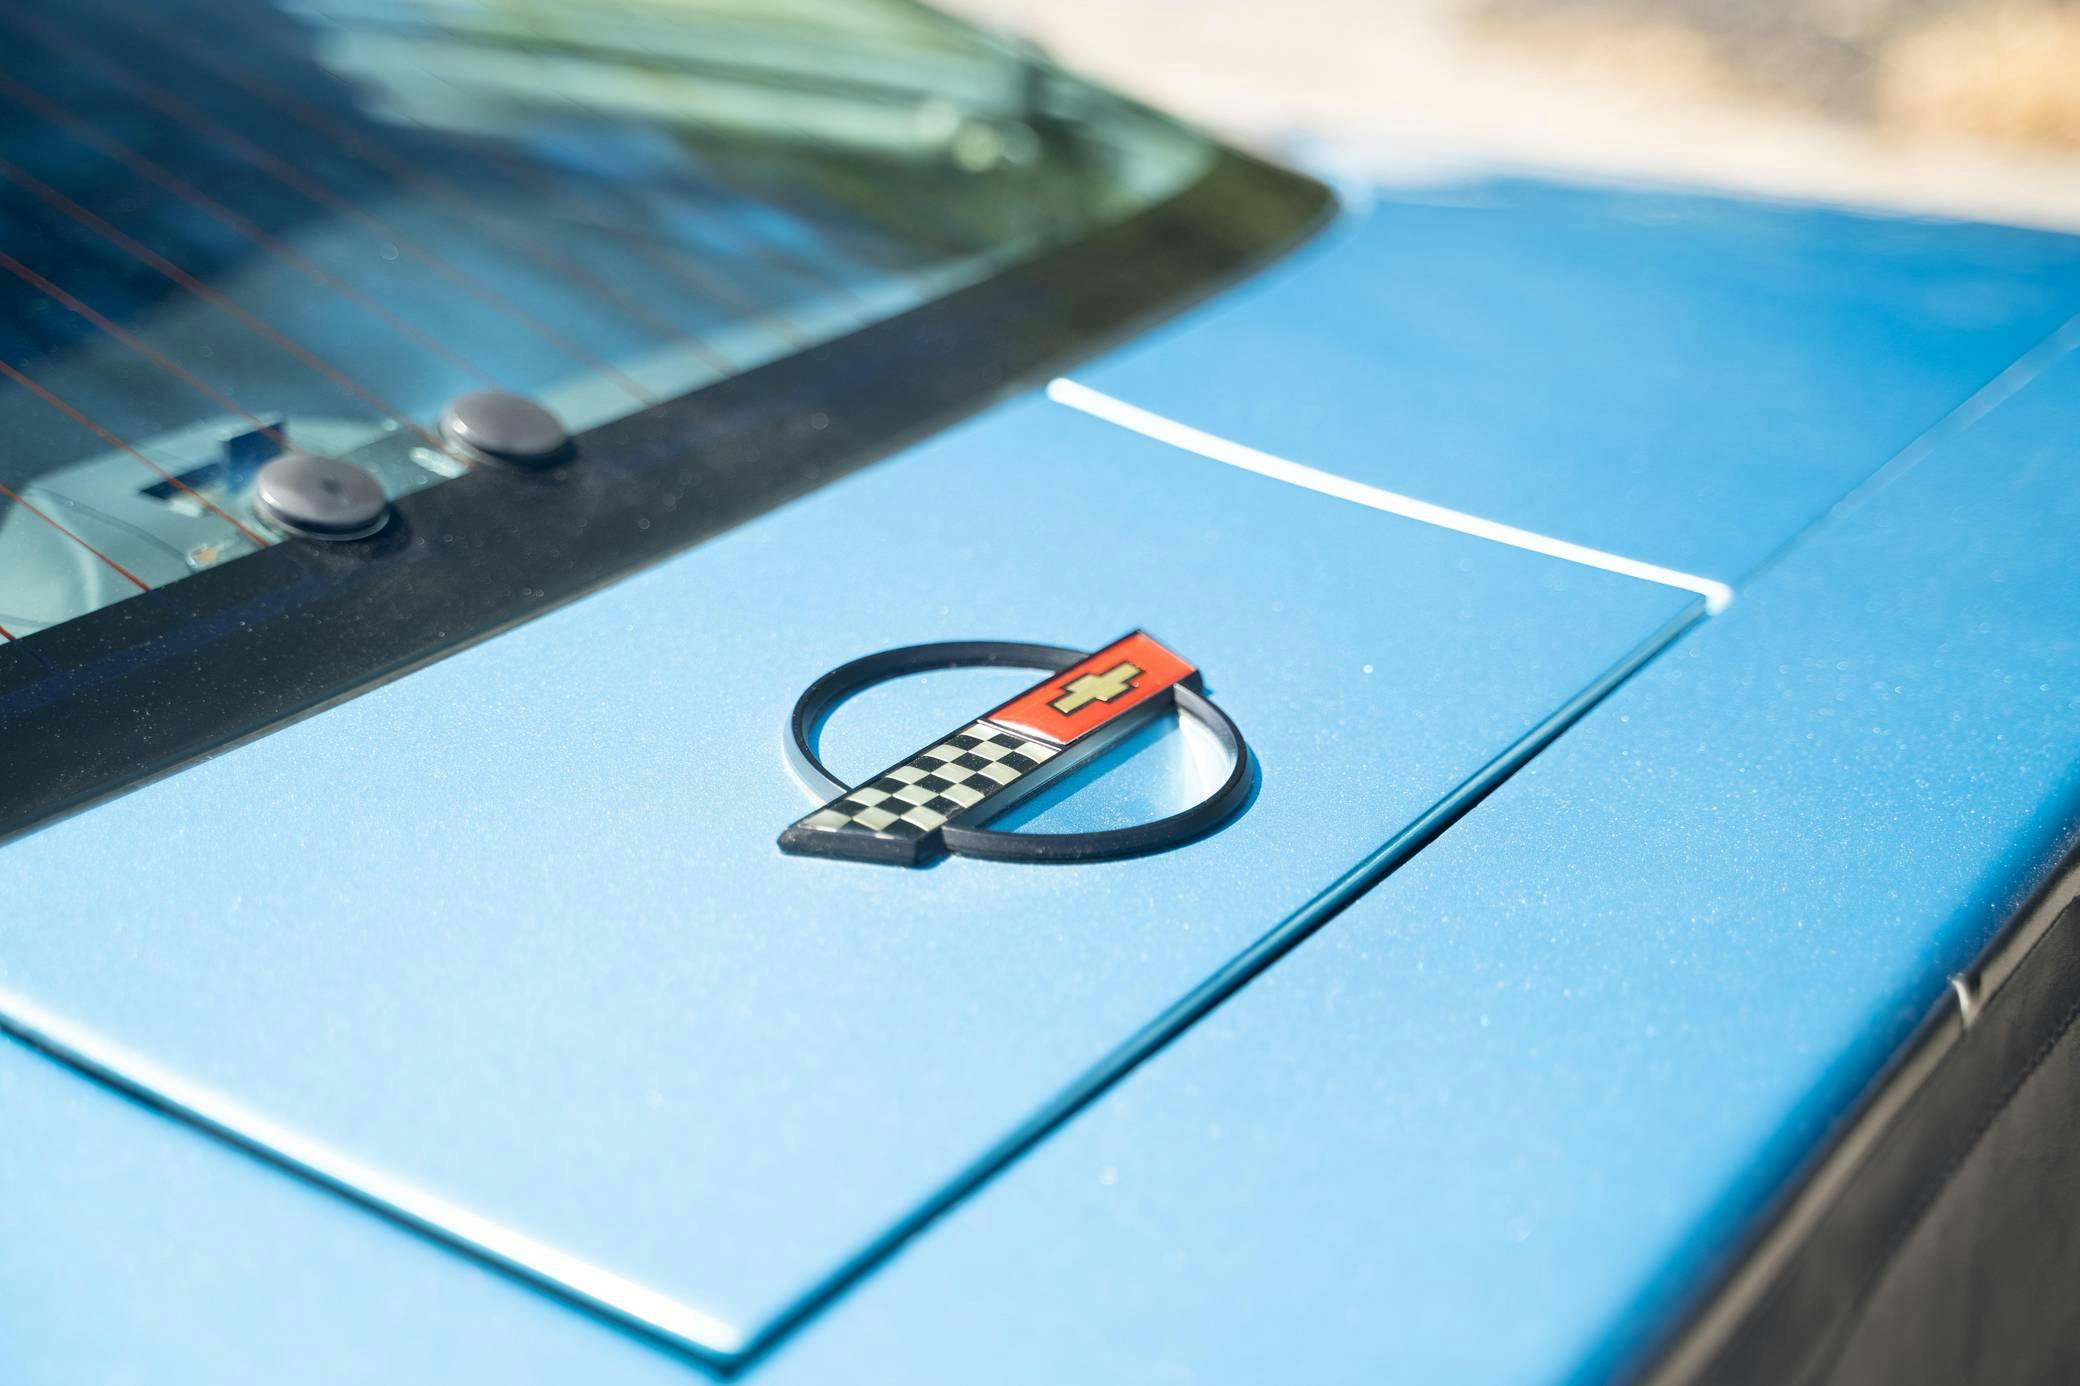 Chevy Vette King of the Hill Prototype emblem